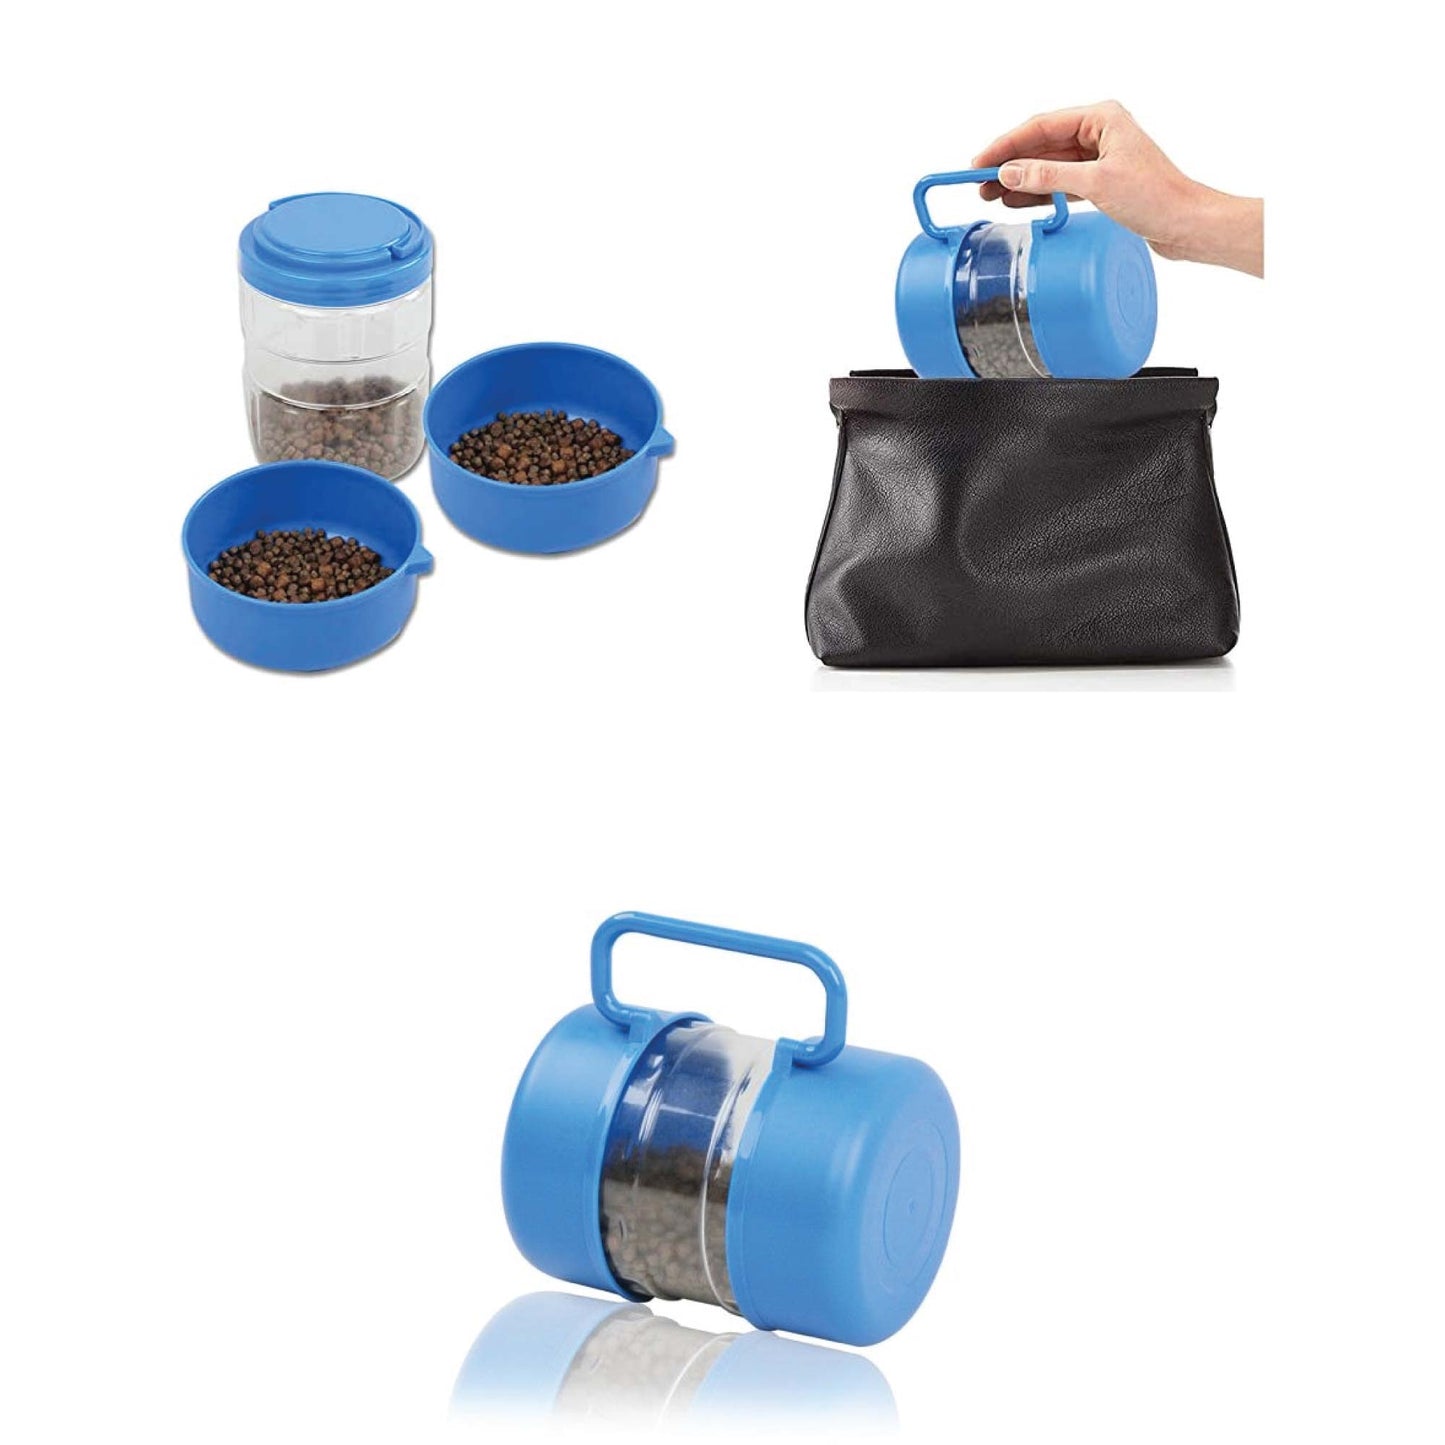 3 In 1 Pet Travel Food Water Bowl Set Dog Cat Portable Feeding Carry Container